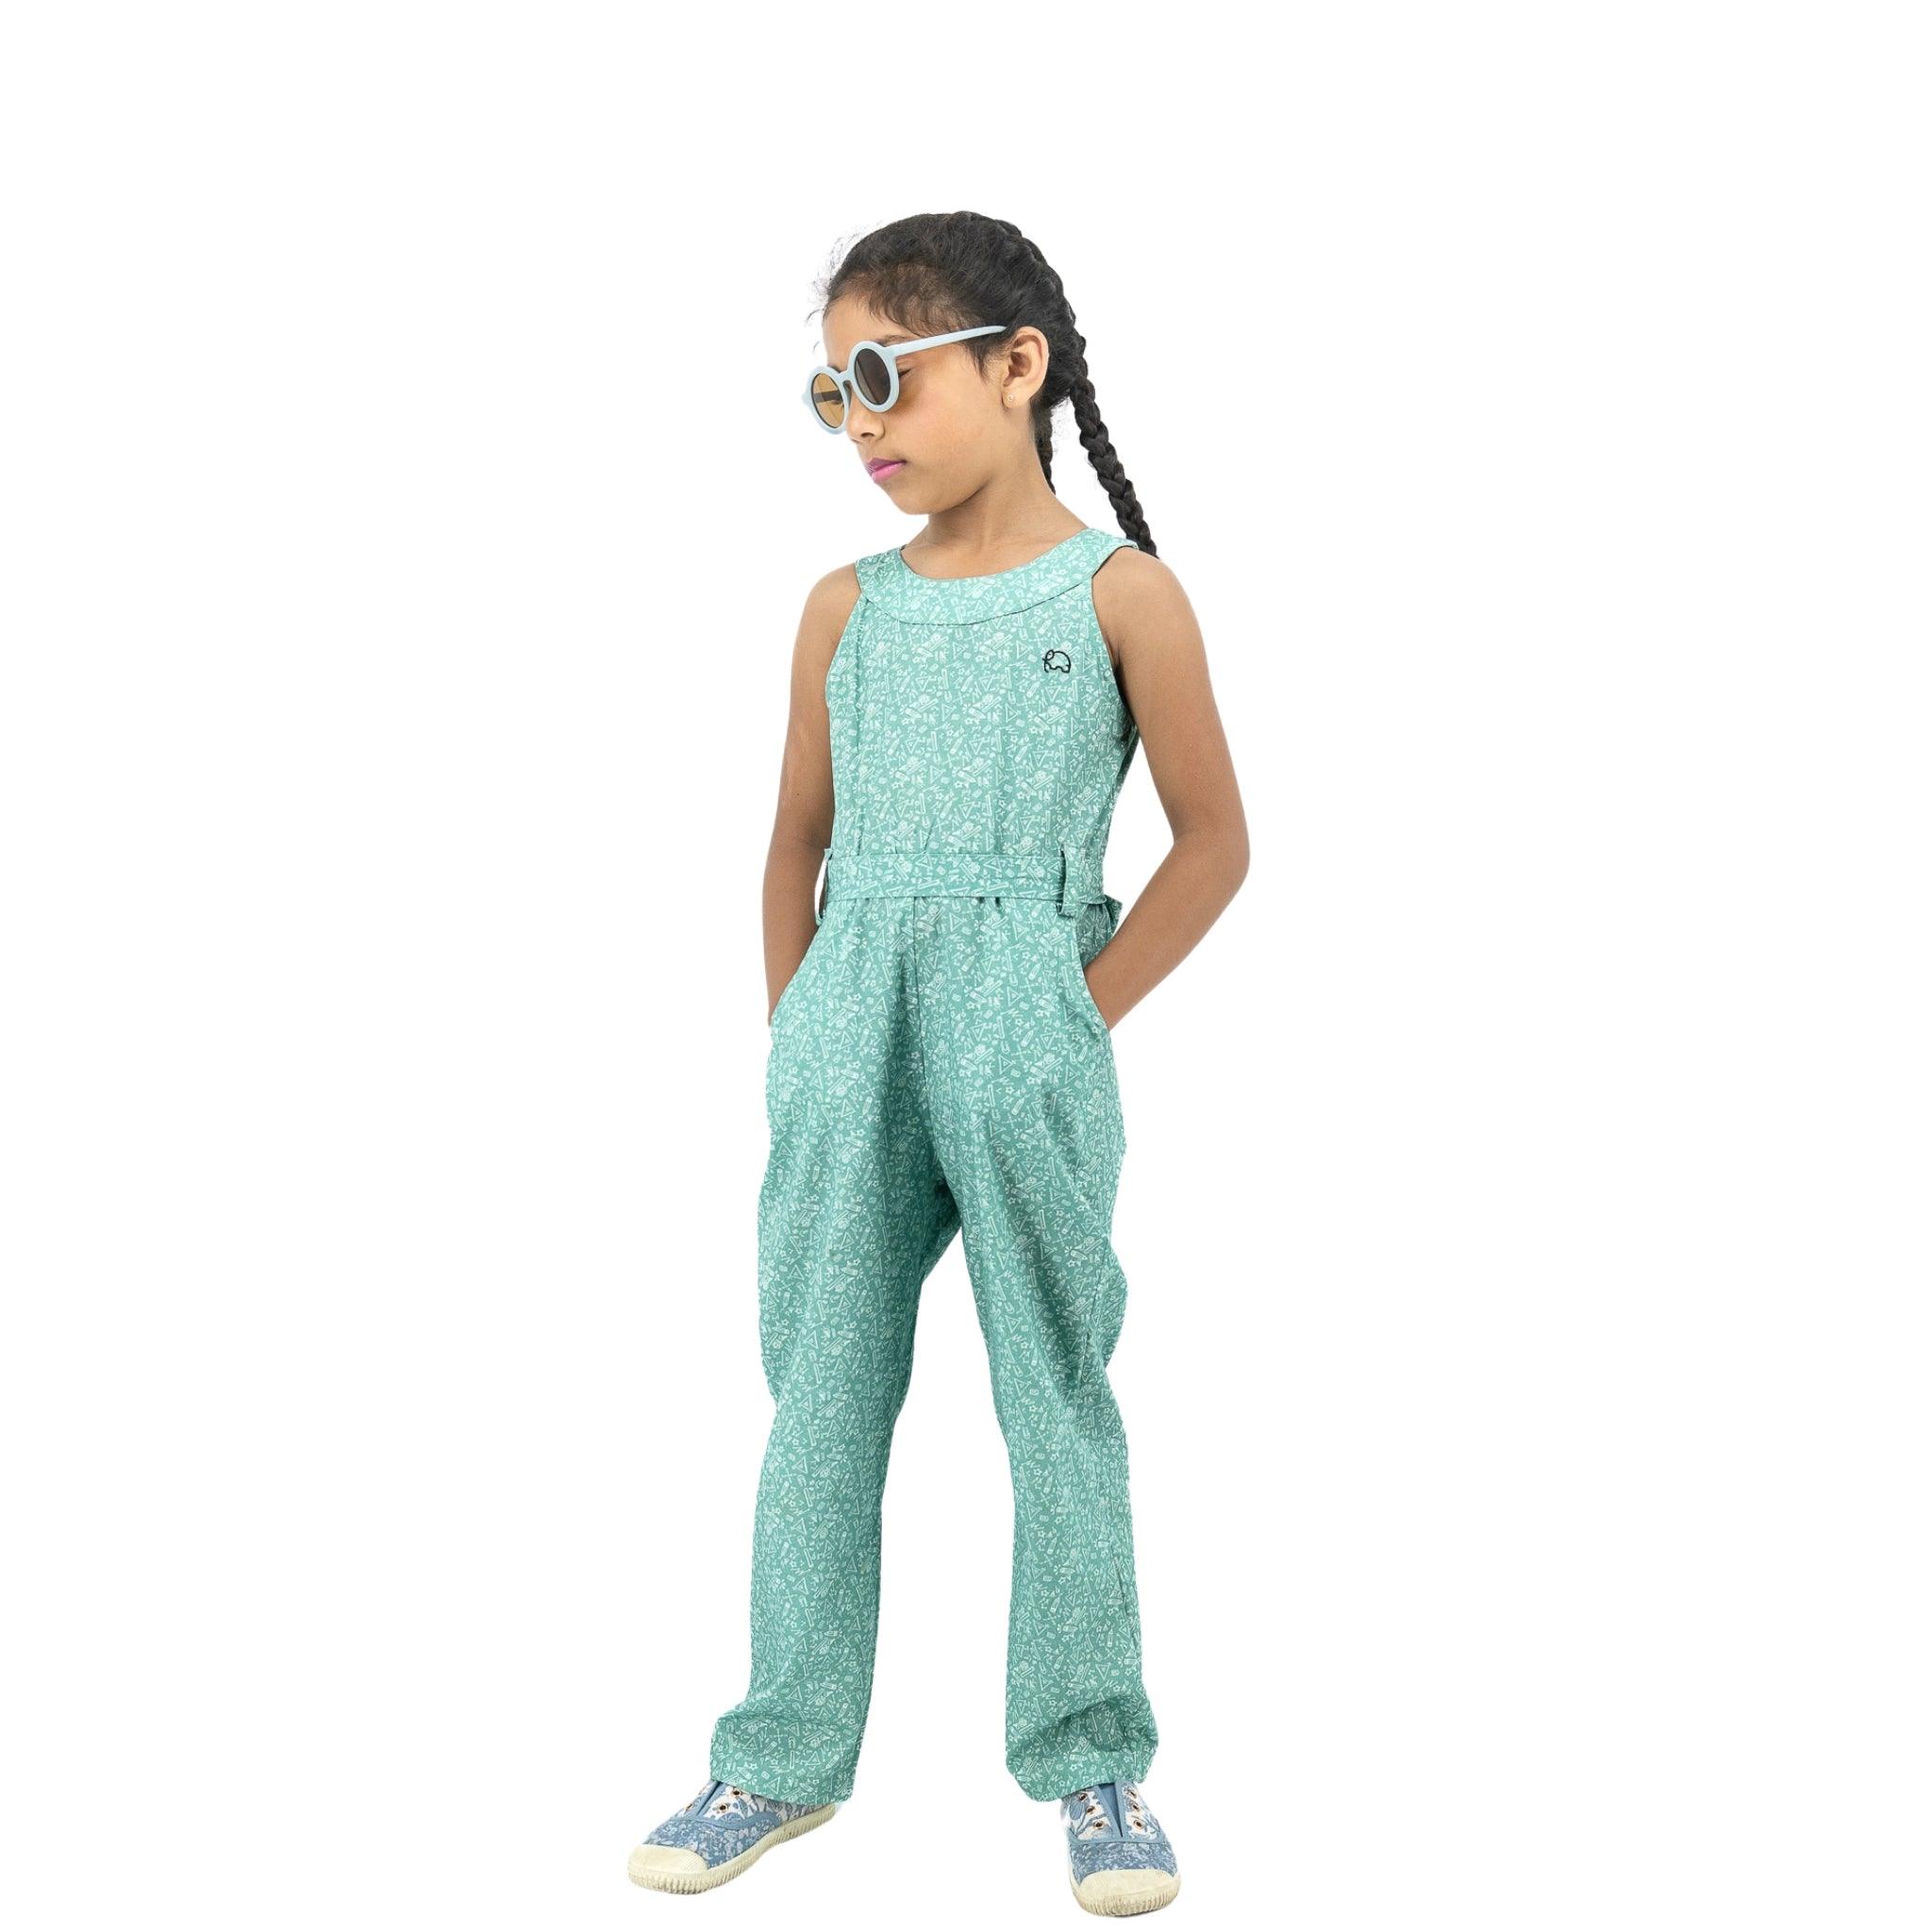 Young girl in a Karee Smoke Green Cotton Jumpsuit and sunglasses, standing with hands on hips against a white background.